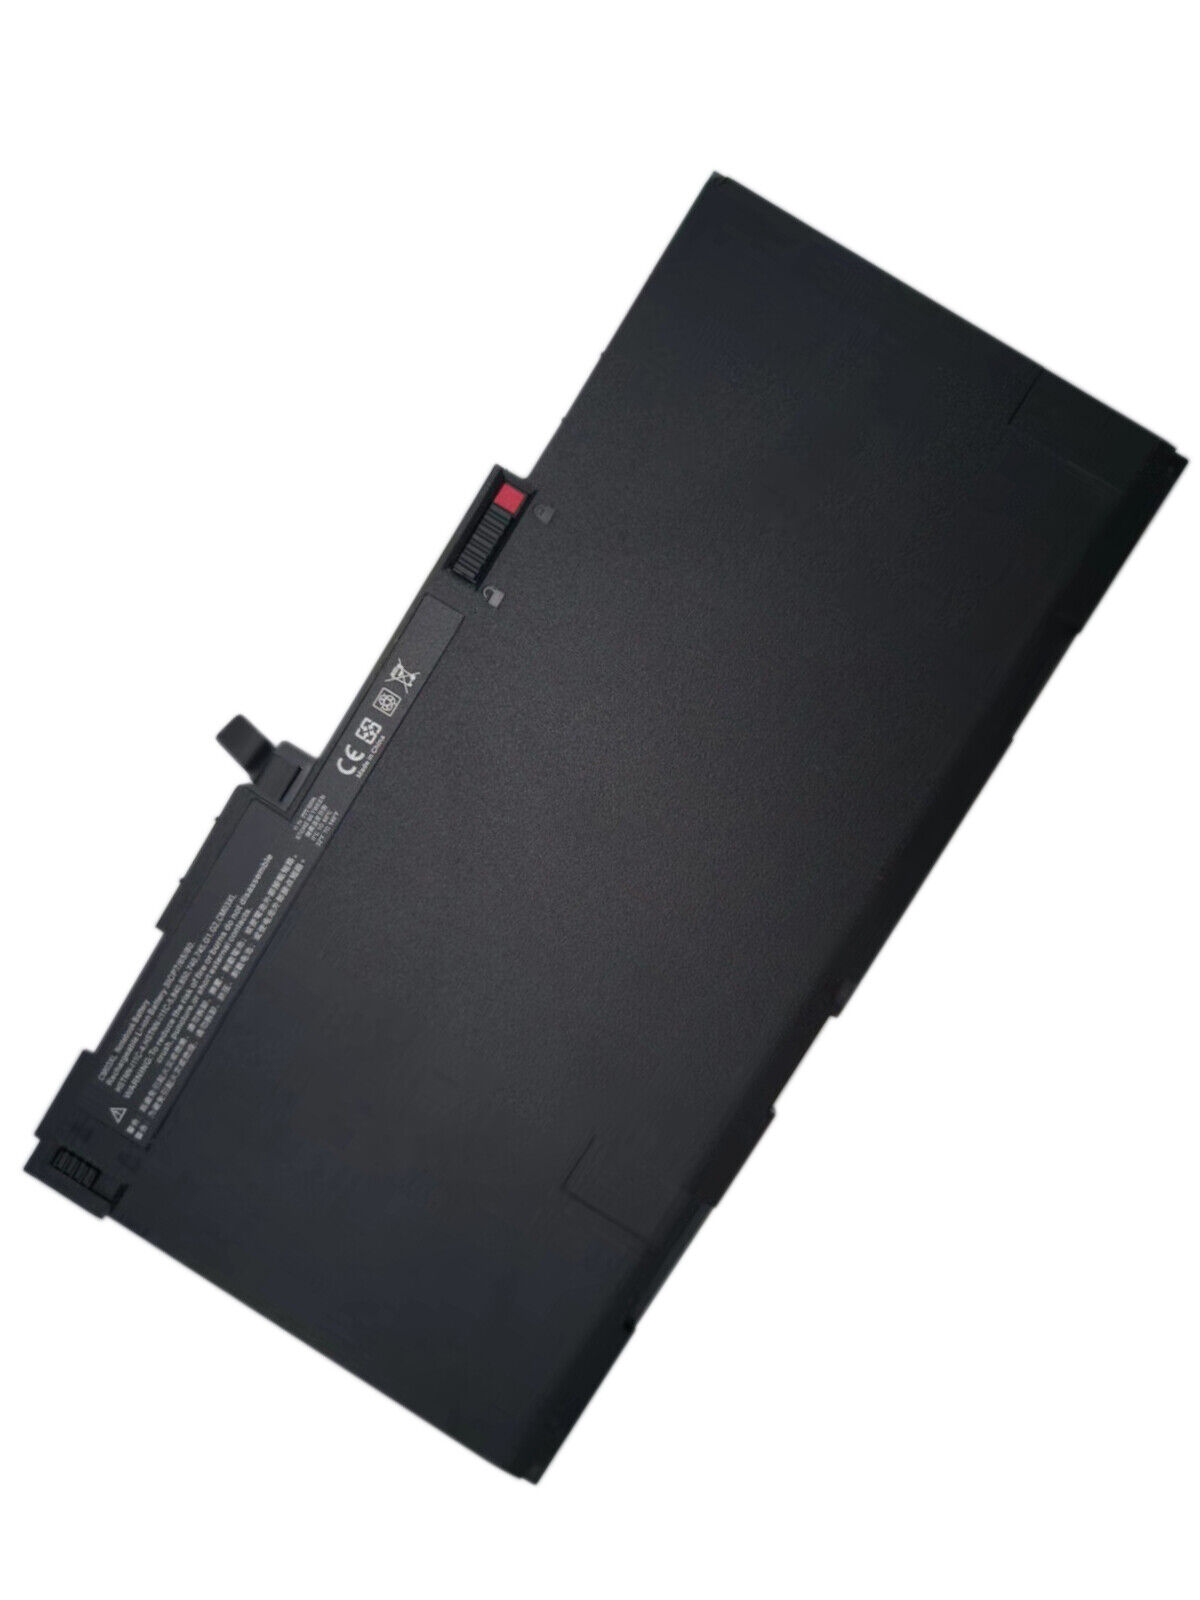 11.1V 50Wh Replacement Laptop Battery for HP CM03XL EliteBook 740 745 750 840 850 855 G1 G2